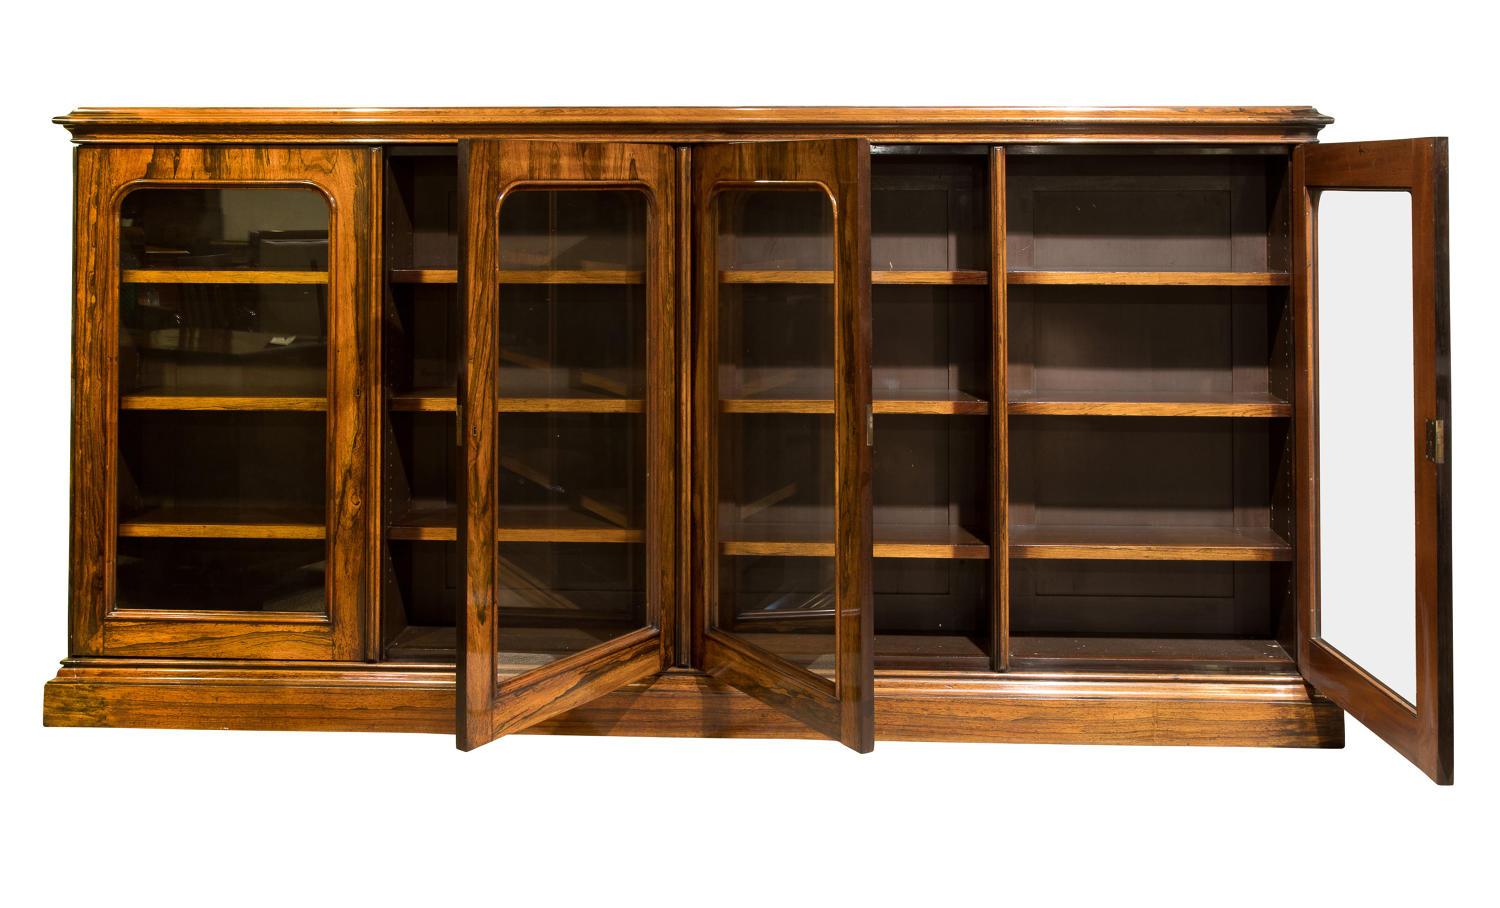 A rare, bespoke four door glazed bookcase, made from rosewood with mahogany ends. This stunning piece of furniture has unique features in the form of its shelf supports,
circa 1880.